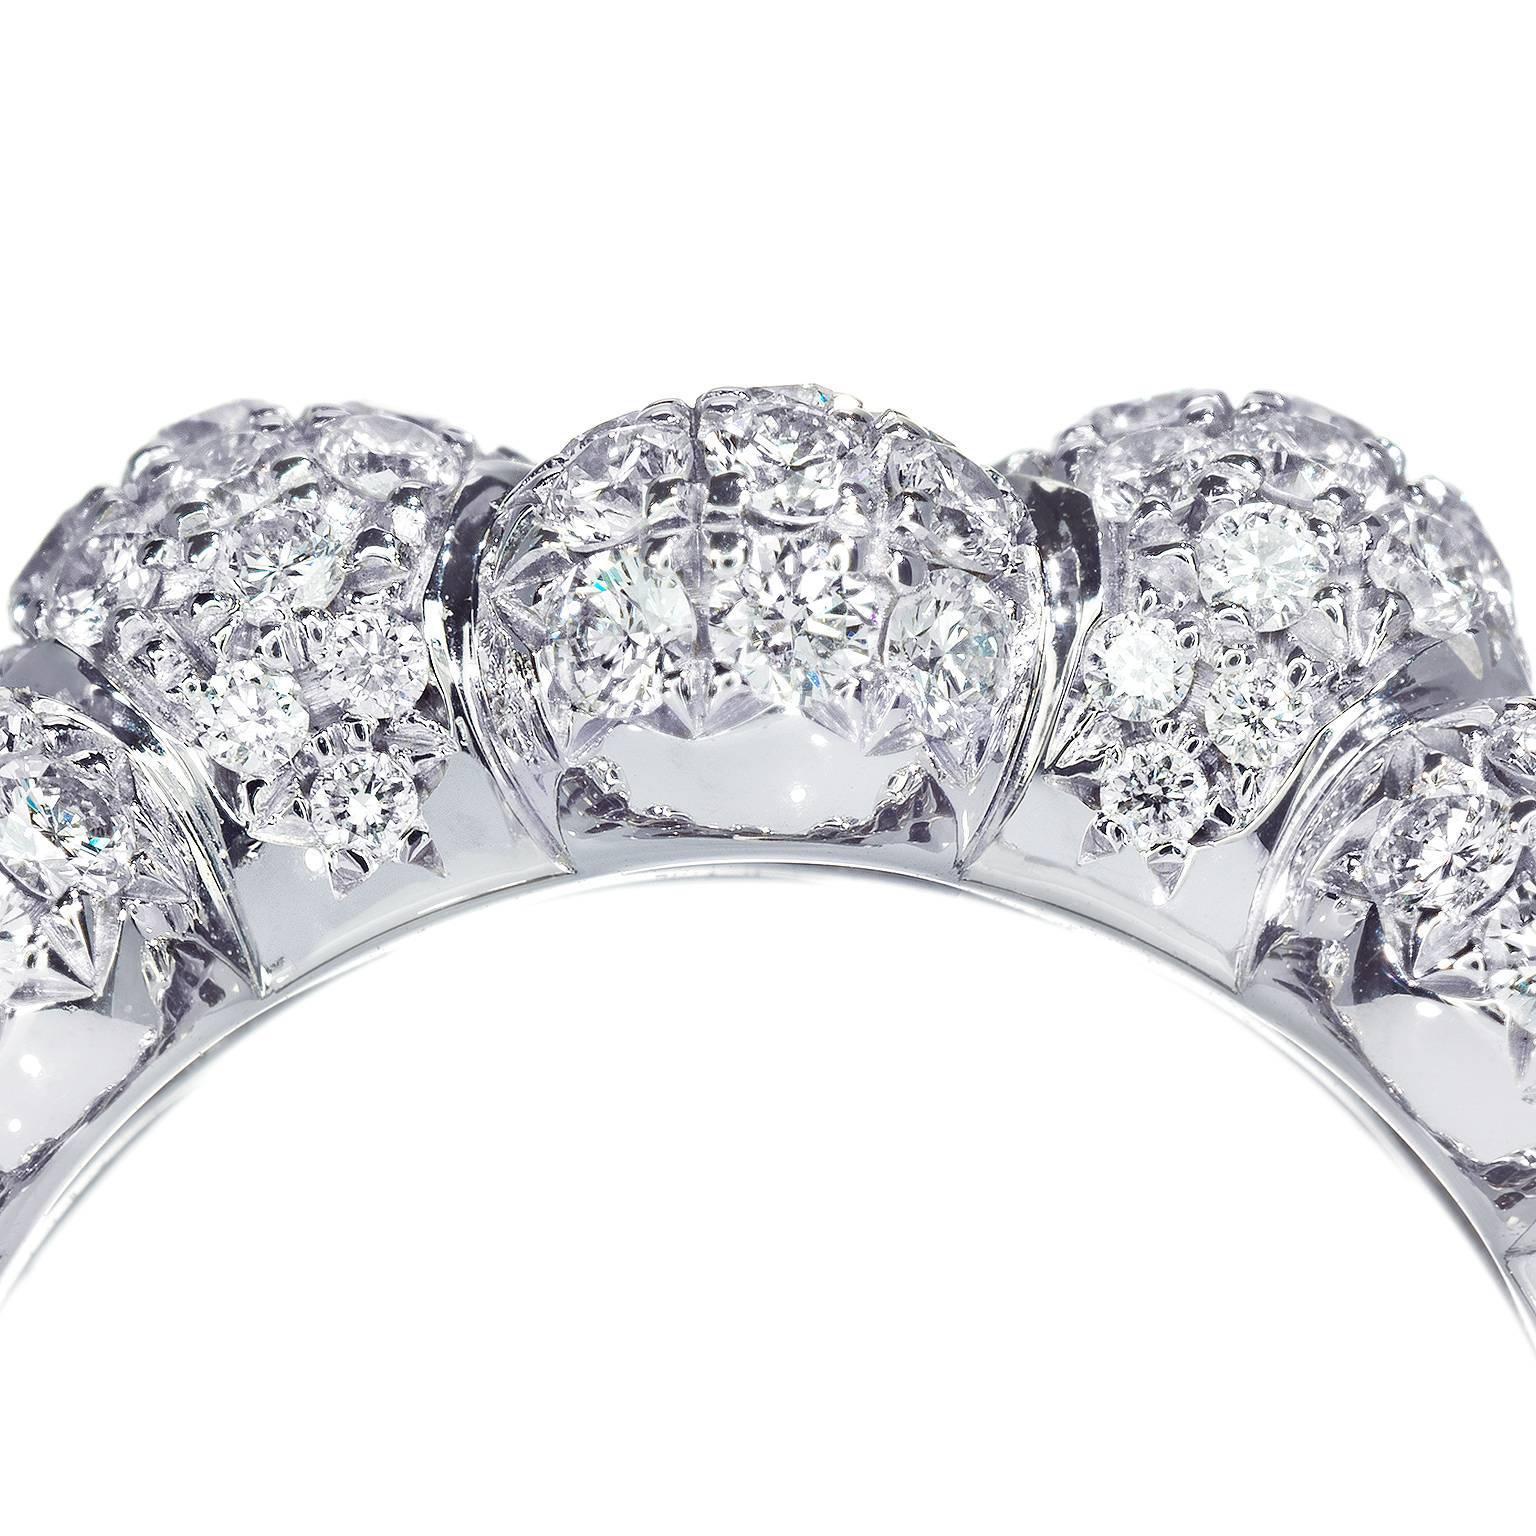 This beautiful pave-set 18 Karat white gold and diamond right hand, or cocktail, ring designed by Towe Norlen in 2009, has 328 hand set brilliant-cut Top Wesselton (TW vvs) high quality diamonds. In total 3.98 Carats. 

The Celeste ring is composed